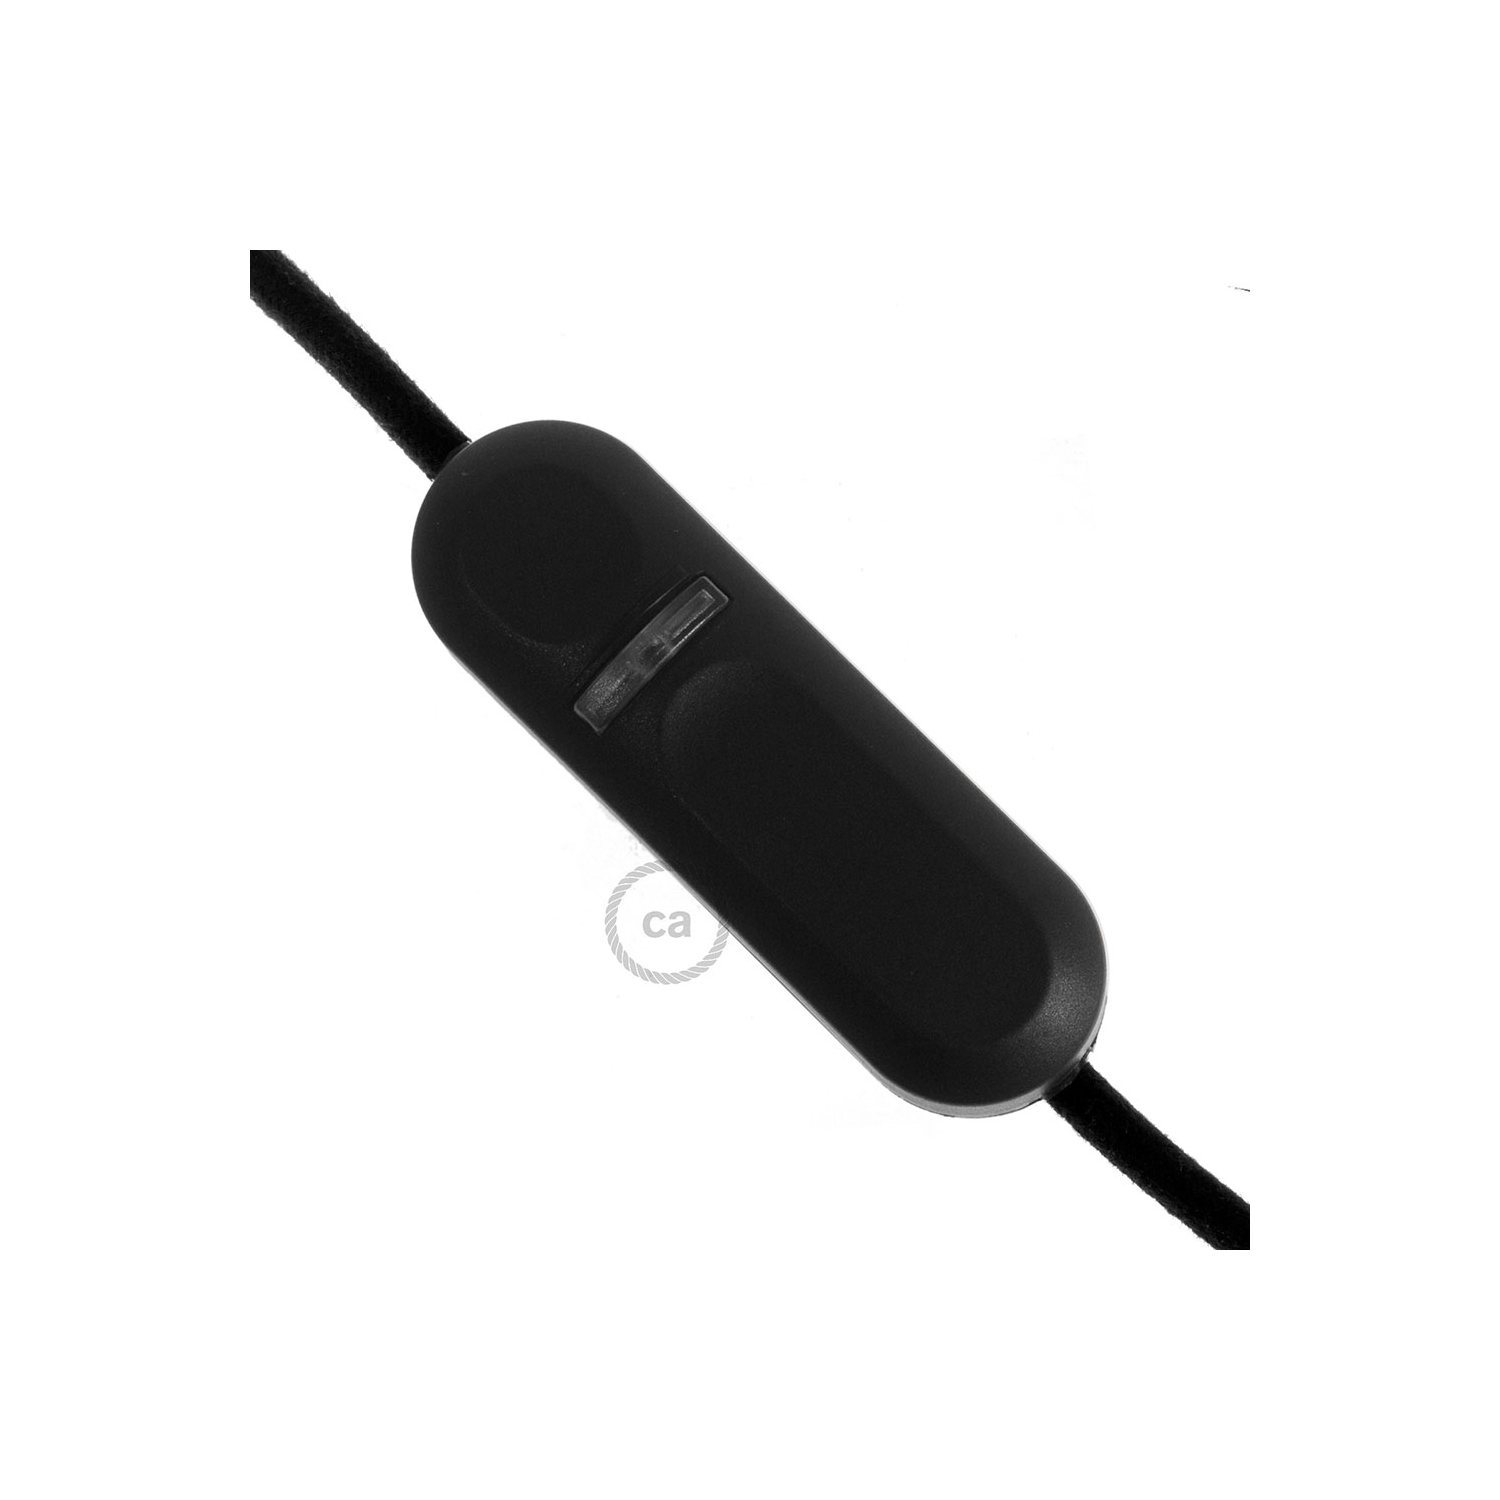 Black inline dimmer switch for lamps & plugin pendant lights